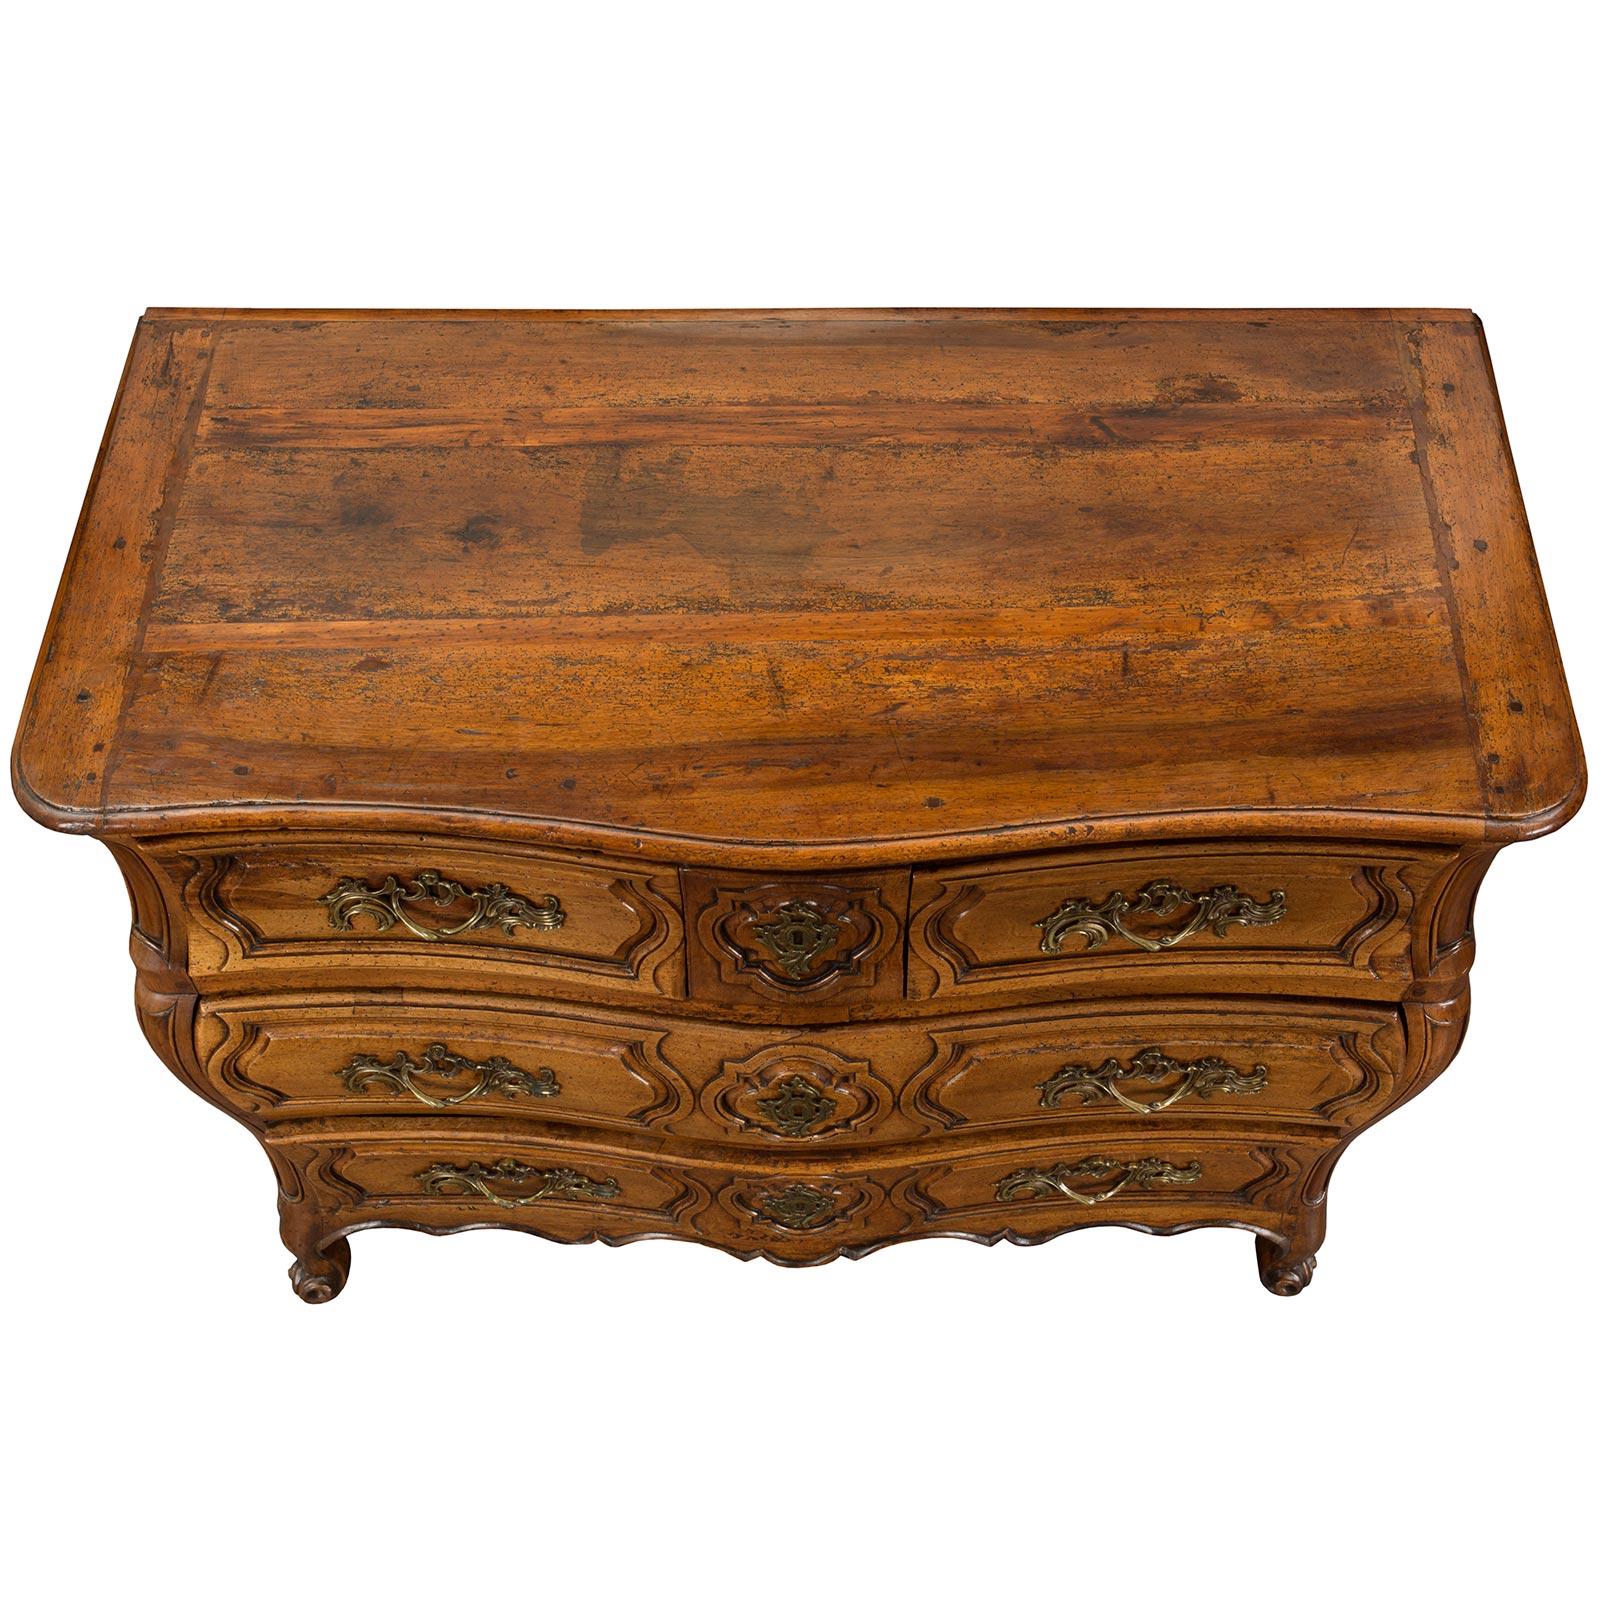 A superb quality French mid 18th Century Louis XV period walnut commode with bronze hardware. The serpentine shaped commode is elegantly raised by cabriole legs which lead to the wonderful scalloped frieze. The commode has two large drawers below